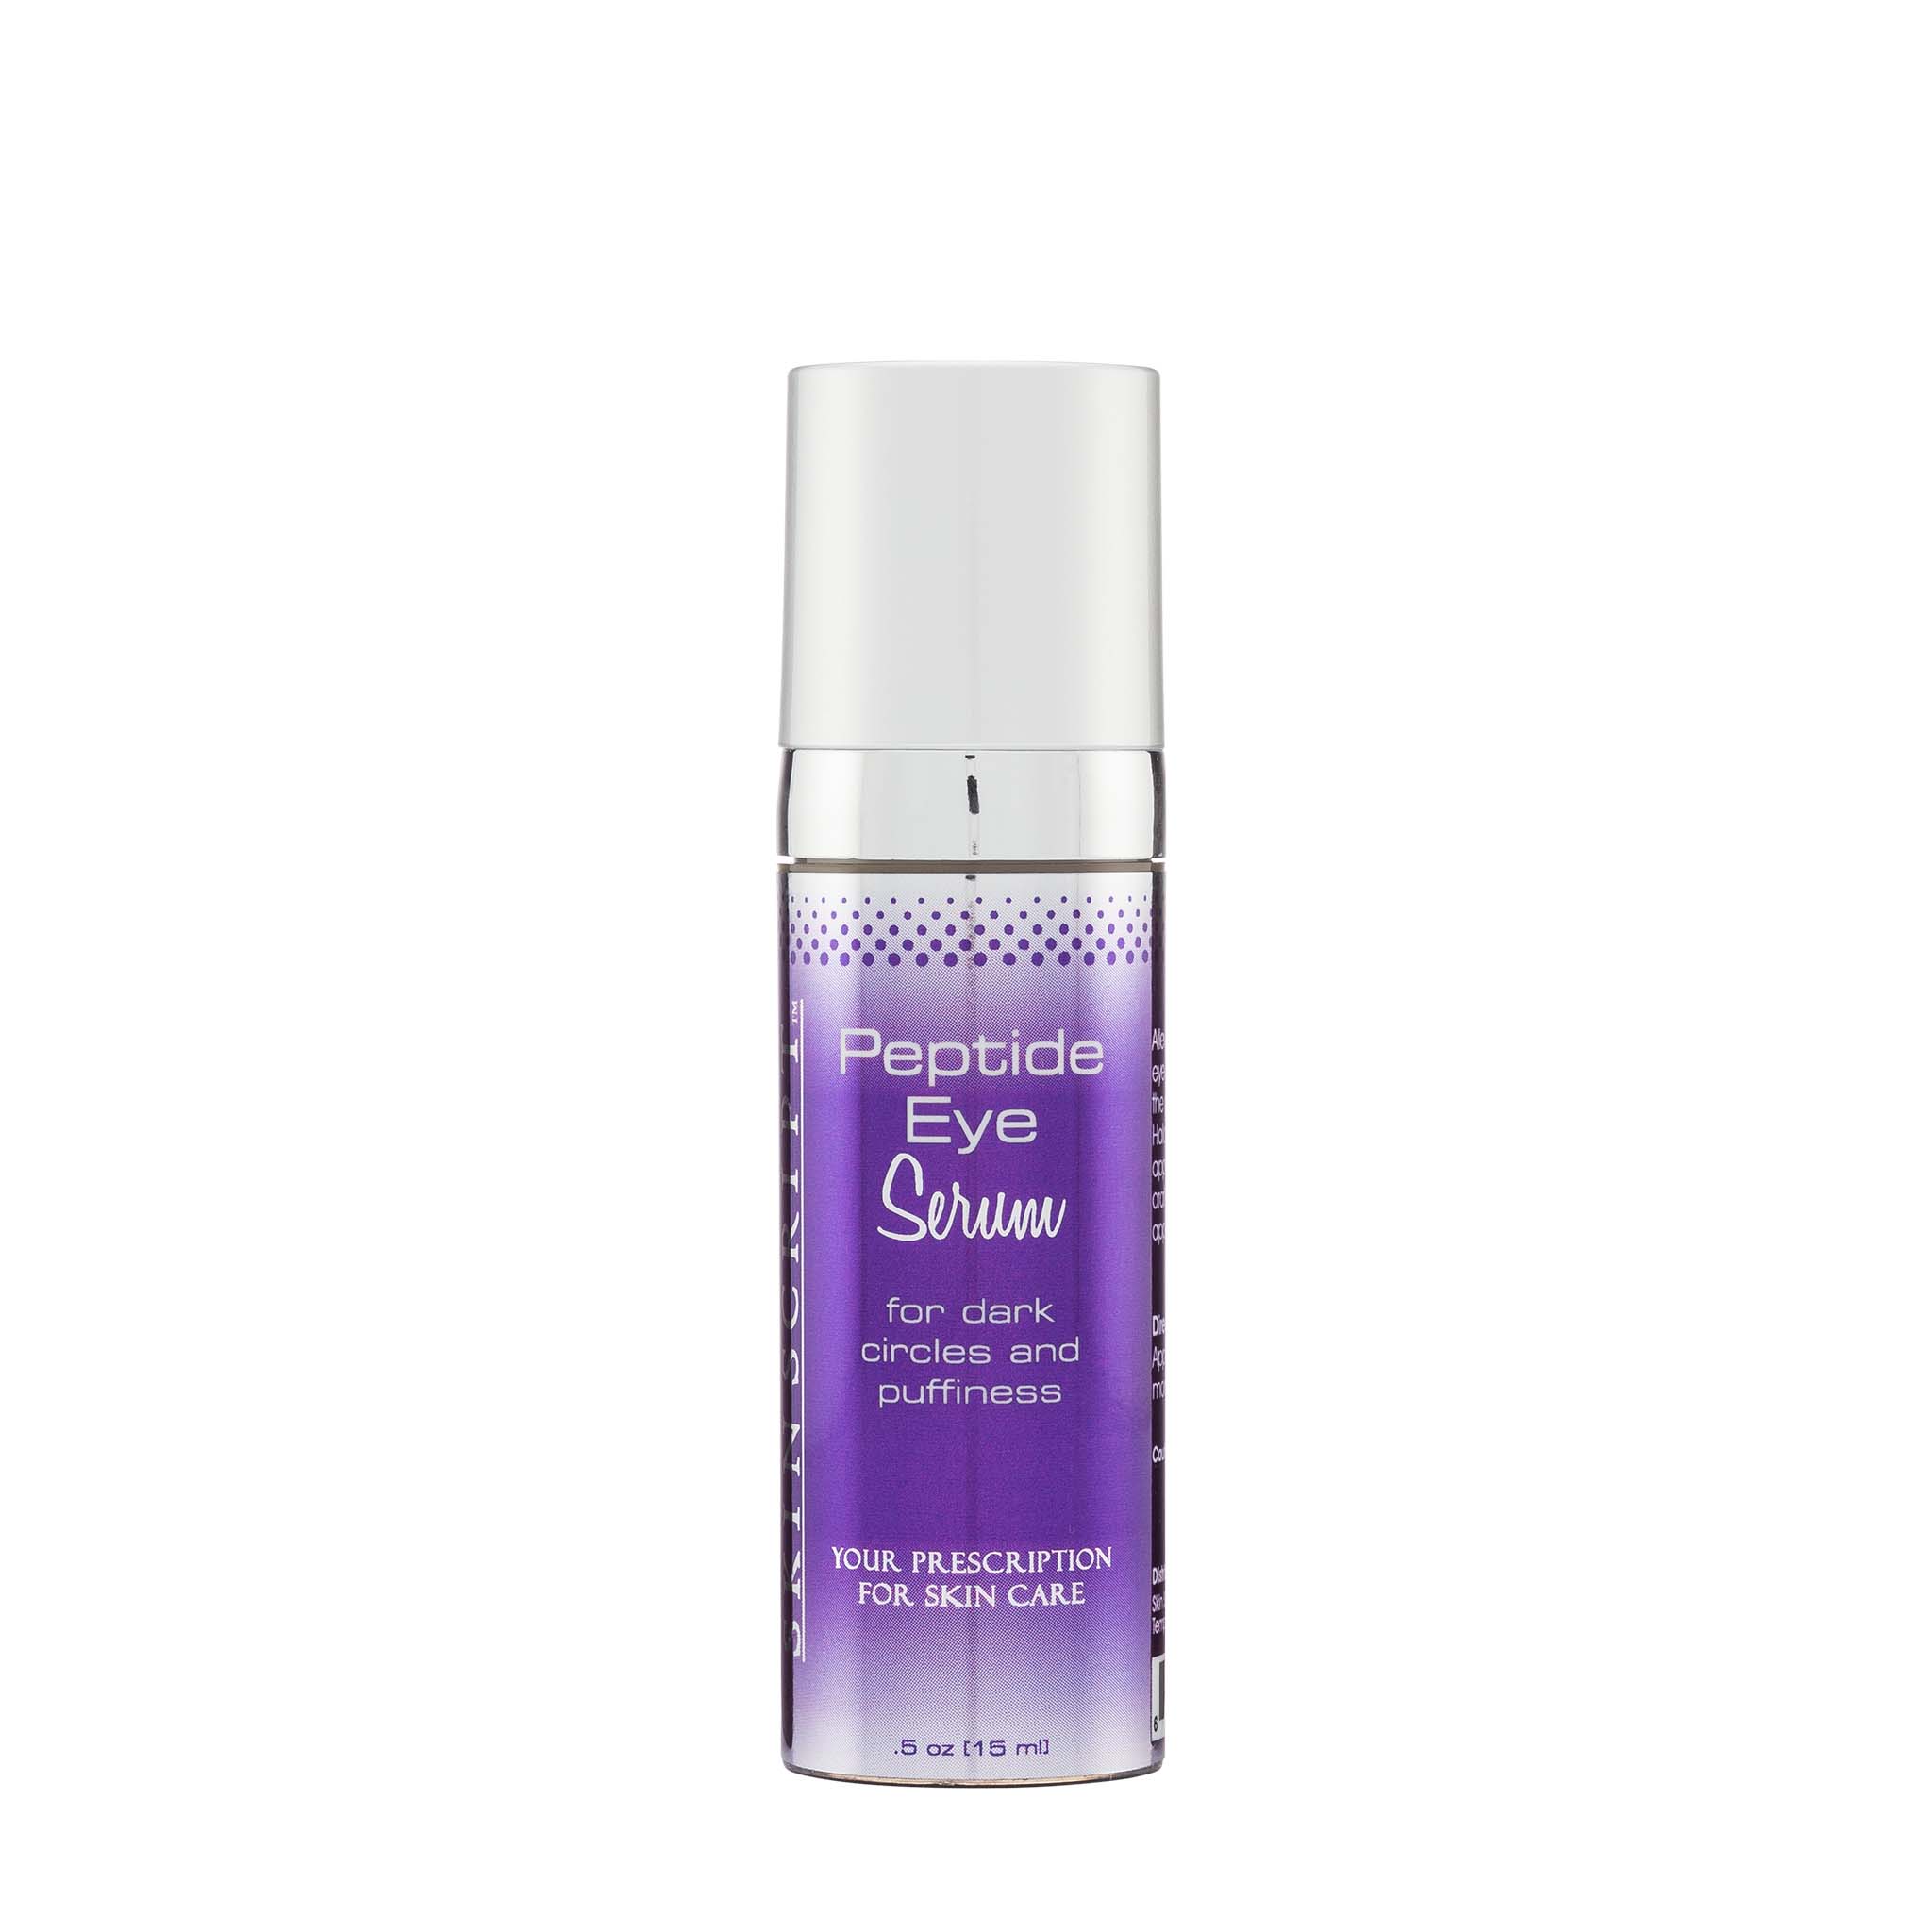 Skin Script Peptide Eye Serum refreshes the area by lightening dark circles, reducing wrinkles and stimulates circulation.